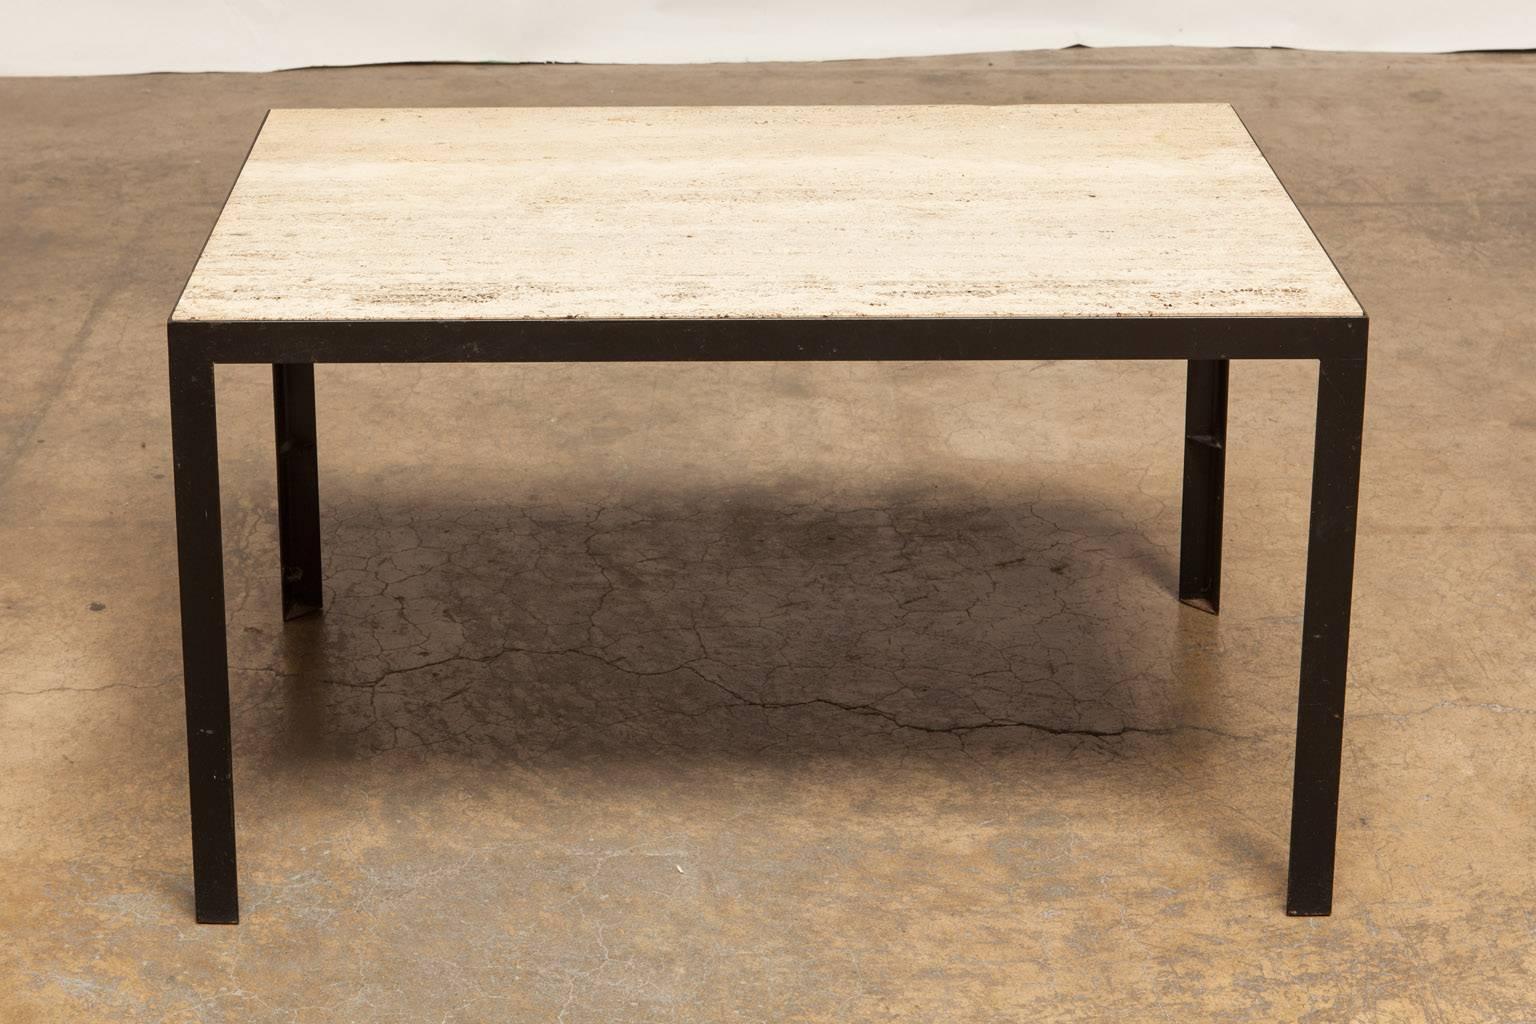 Minimalist Mid-Century coffee table featuring a 1.5" slab of travertine set into a black iron frame. Supported by straight squared legs and made in Italy. The large rectangle of travertine has a natural unfilled finish and an elegant simple